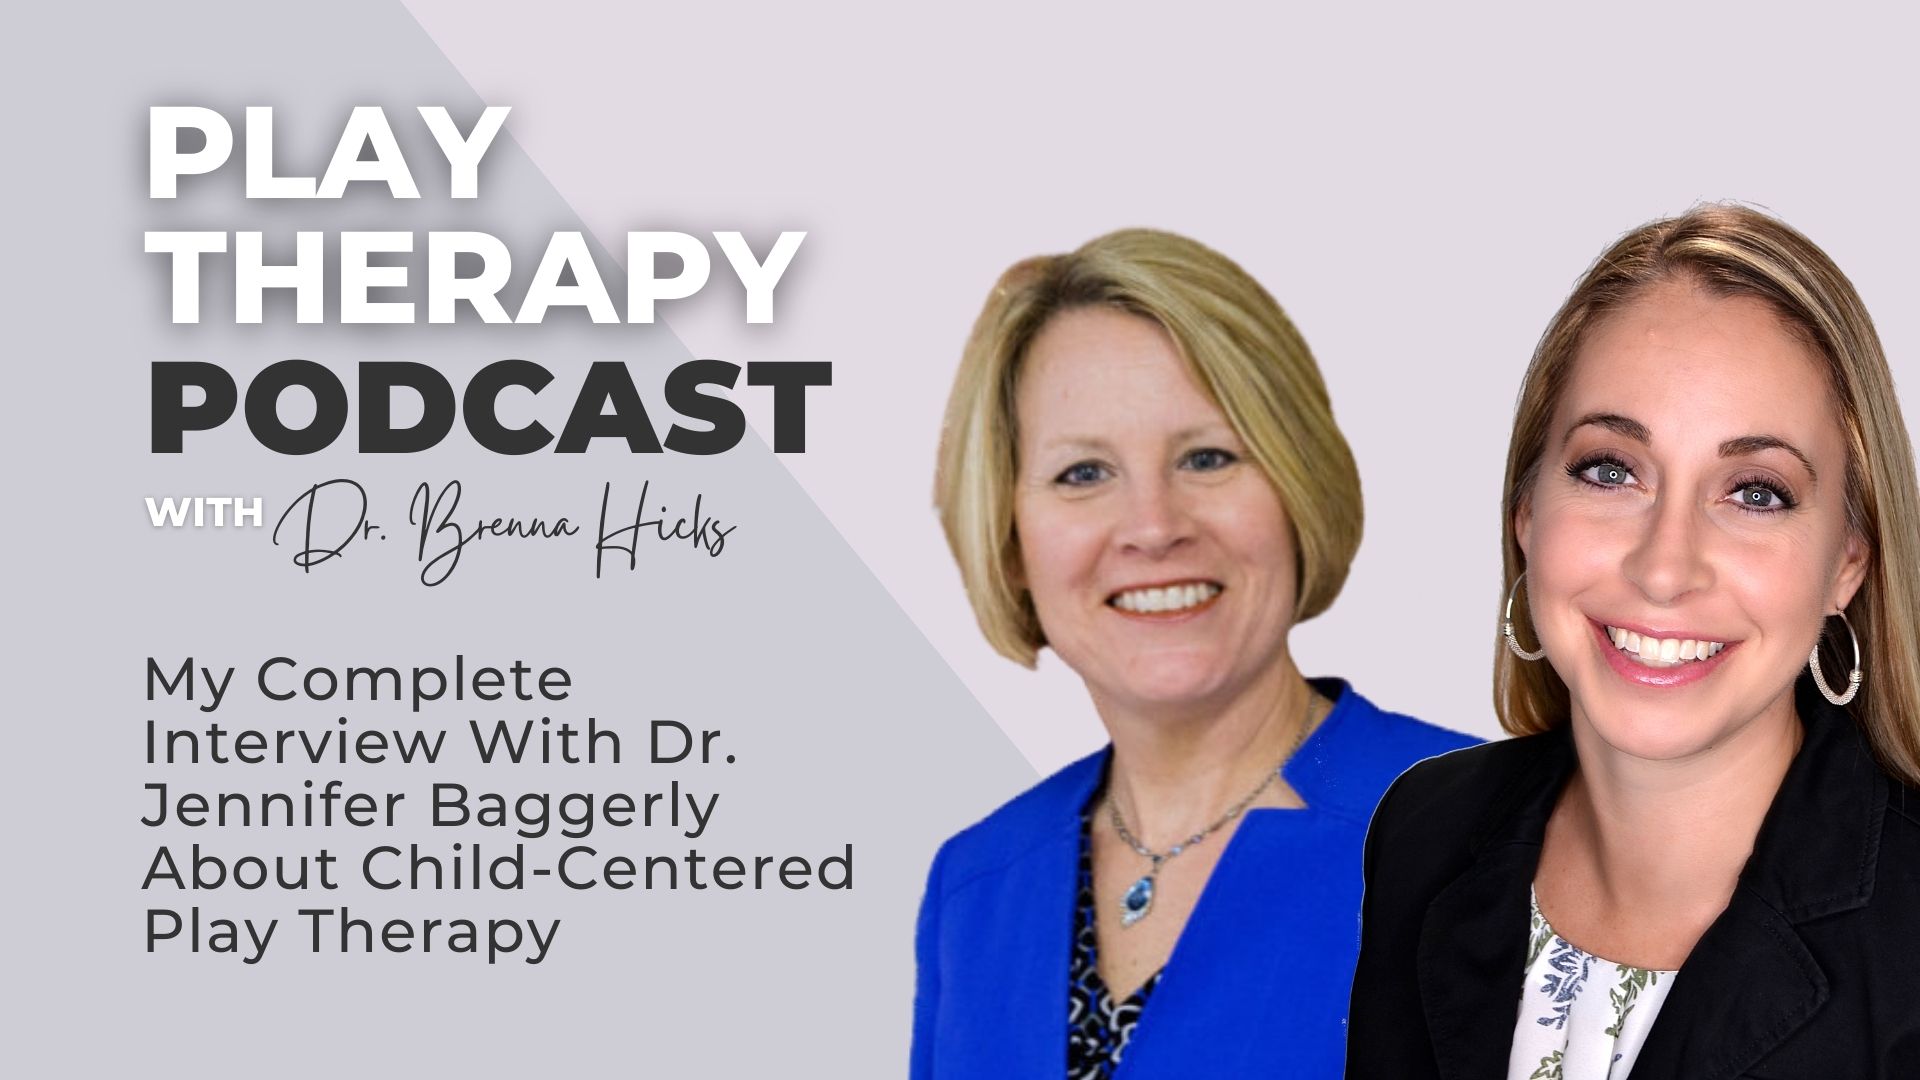 My Complete Interview With Dr. Jennifer Baggerly About Child-Centered Play Therapy